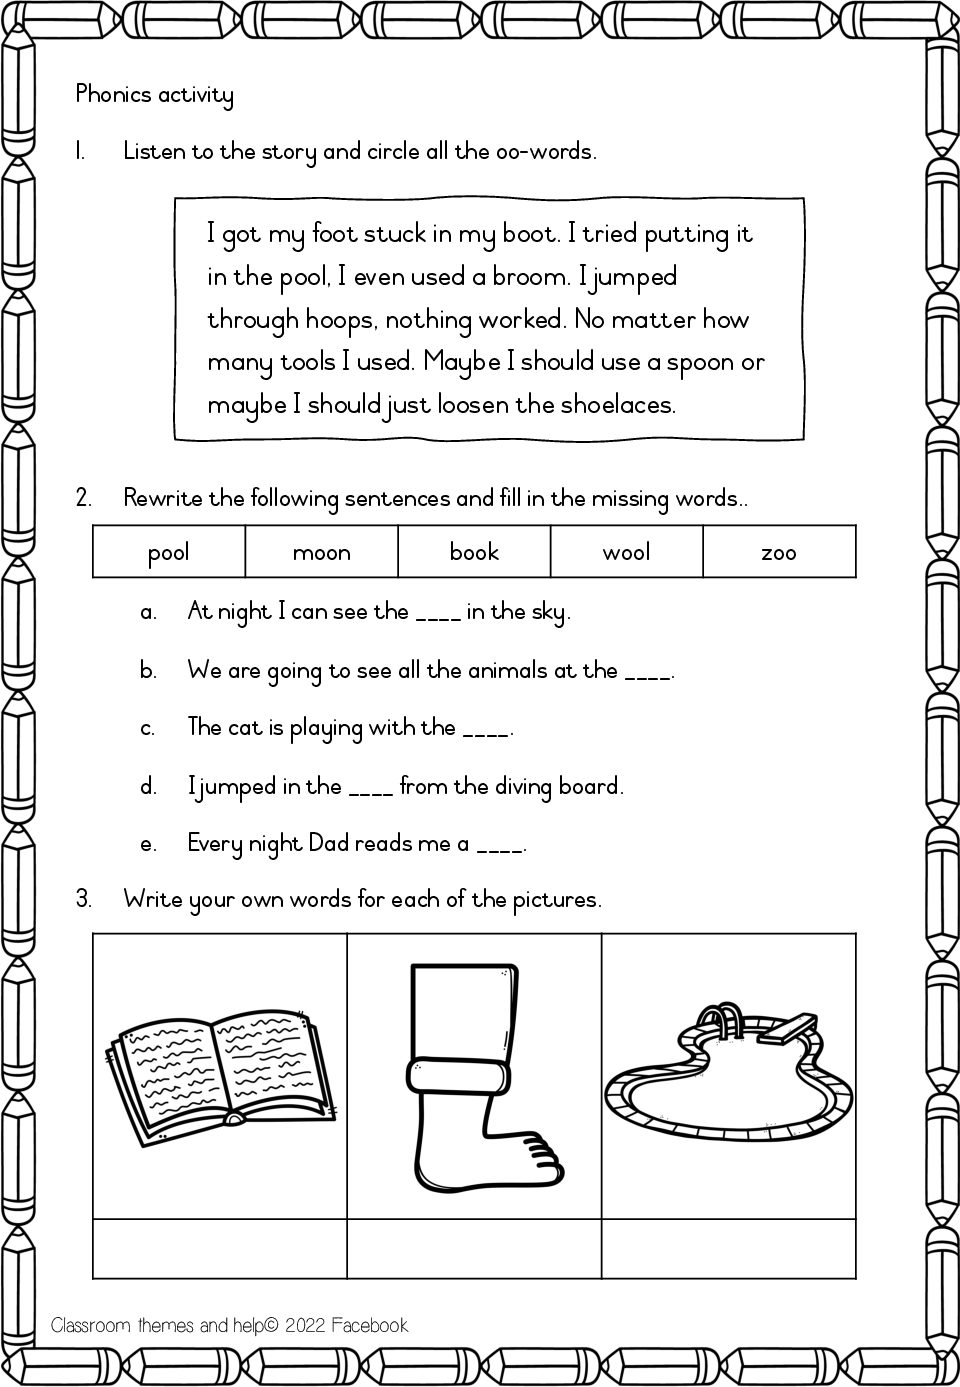 Grade 3 English Worksheet Meaning Of Words And Plurals Smartkids Grade 3 English Fal Workbook